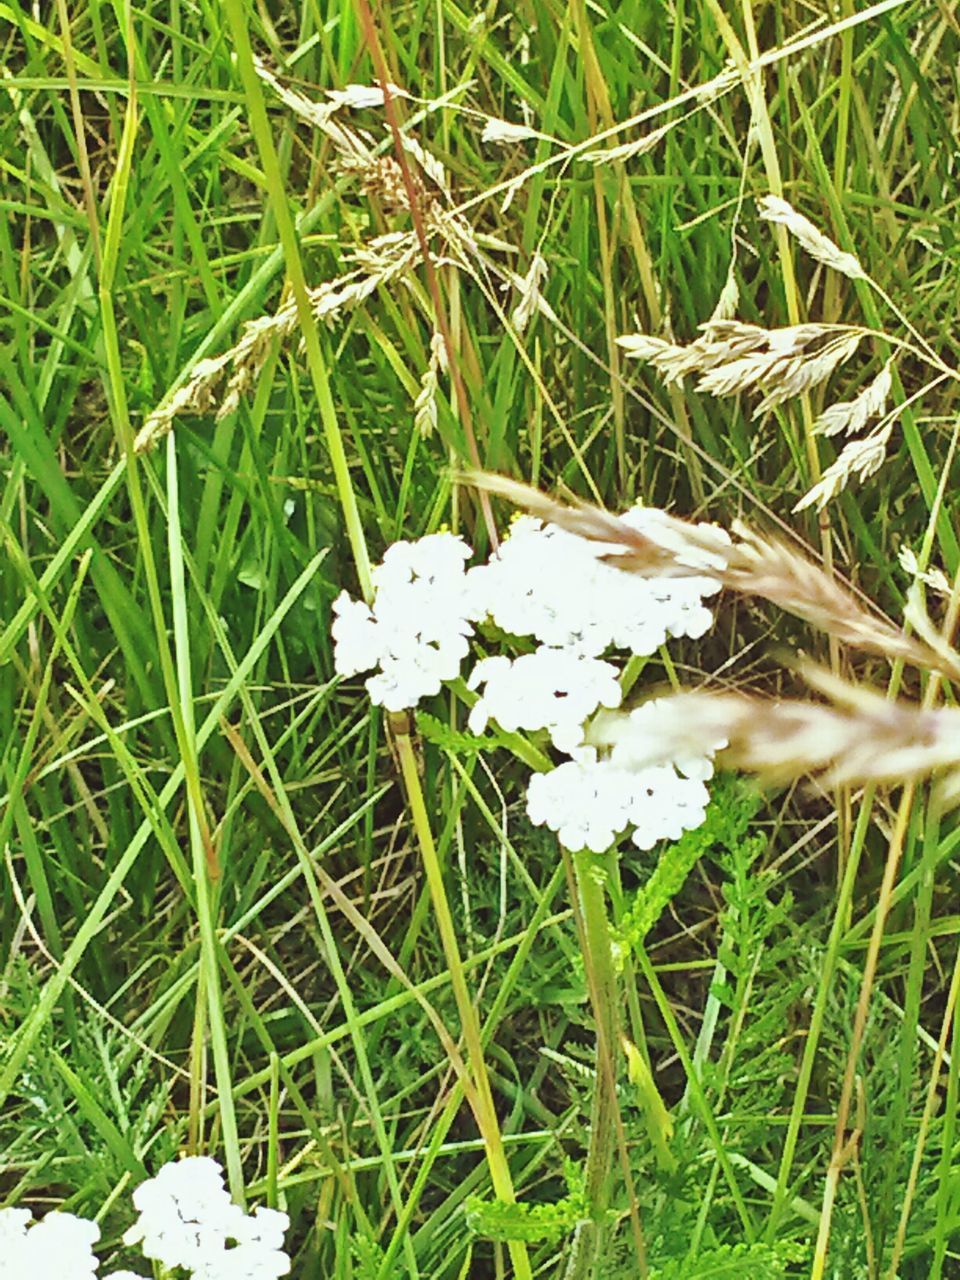 grass, white color, flower, growth, fragility, freshness, field, nature, beauty in nature, plant, grassy, green color, petal, blooming, high angle view, white, flower head, close-up, day, outdoors